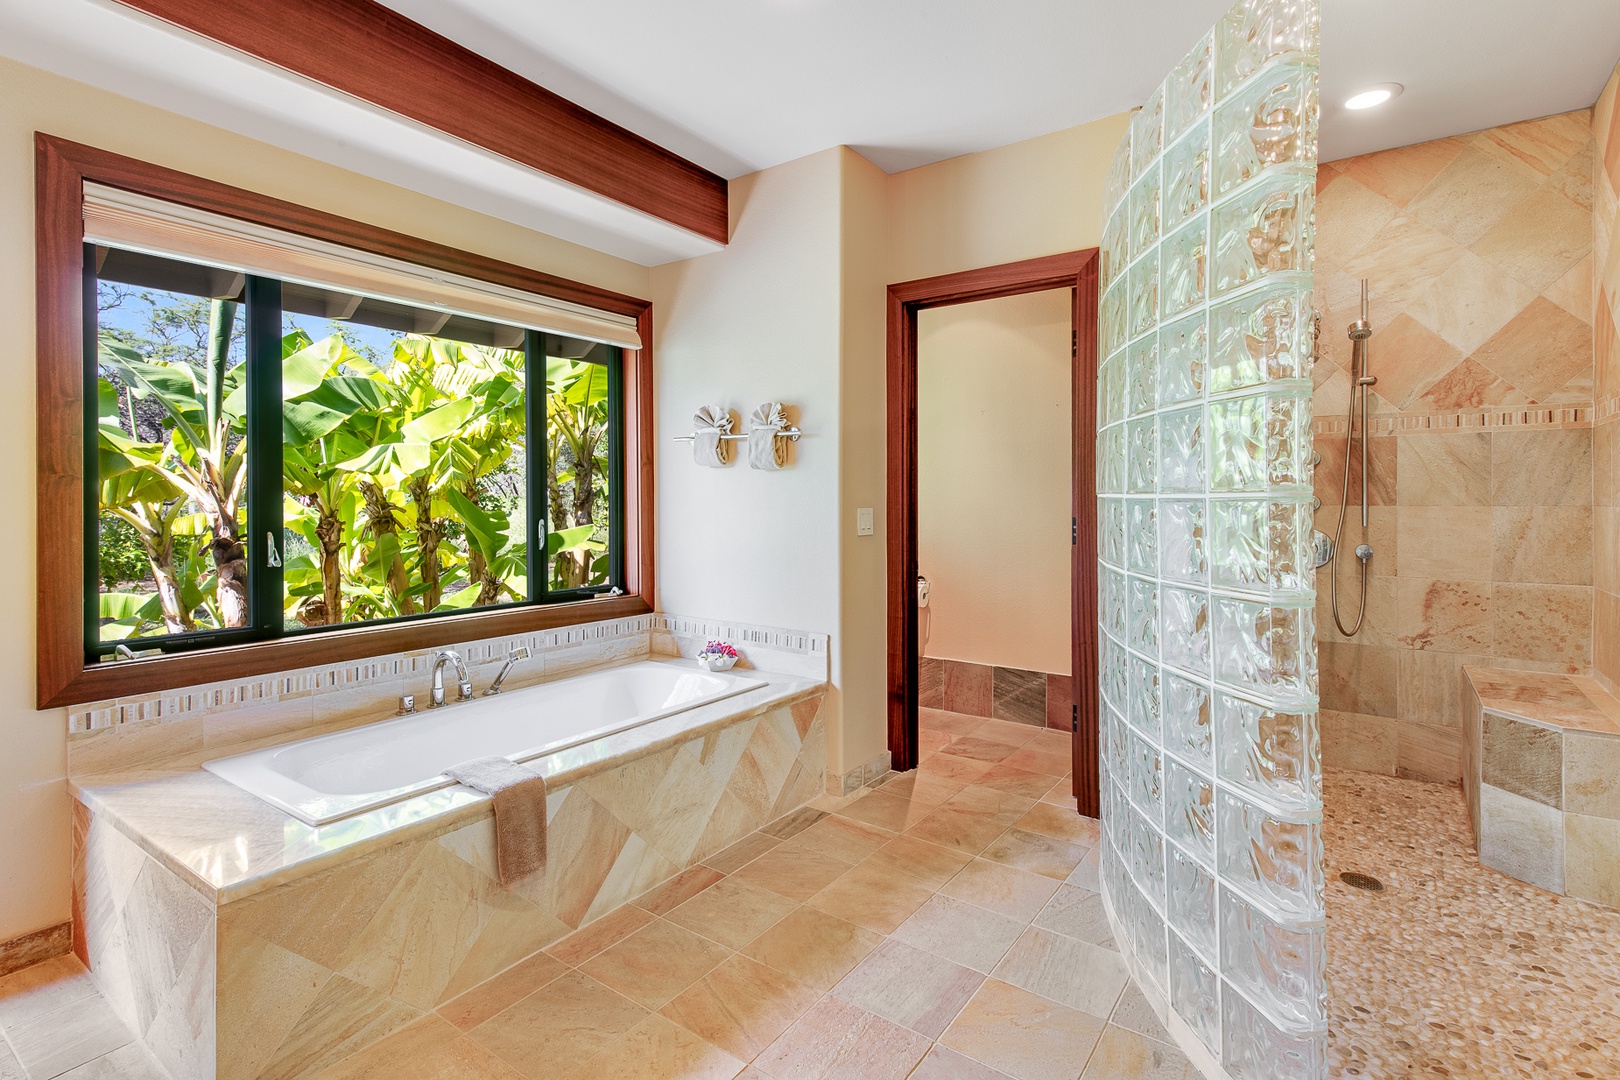 Kamuela Vacation Rentals, Olomana Hale at Kohala Ranch - The primary ensuite offers a spa-like experience